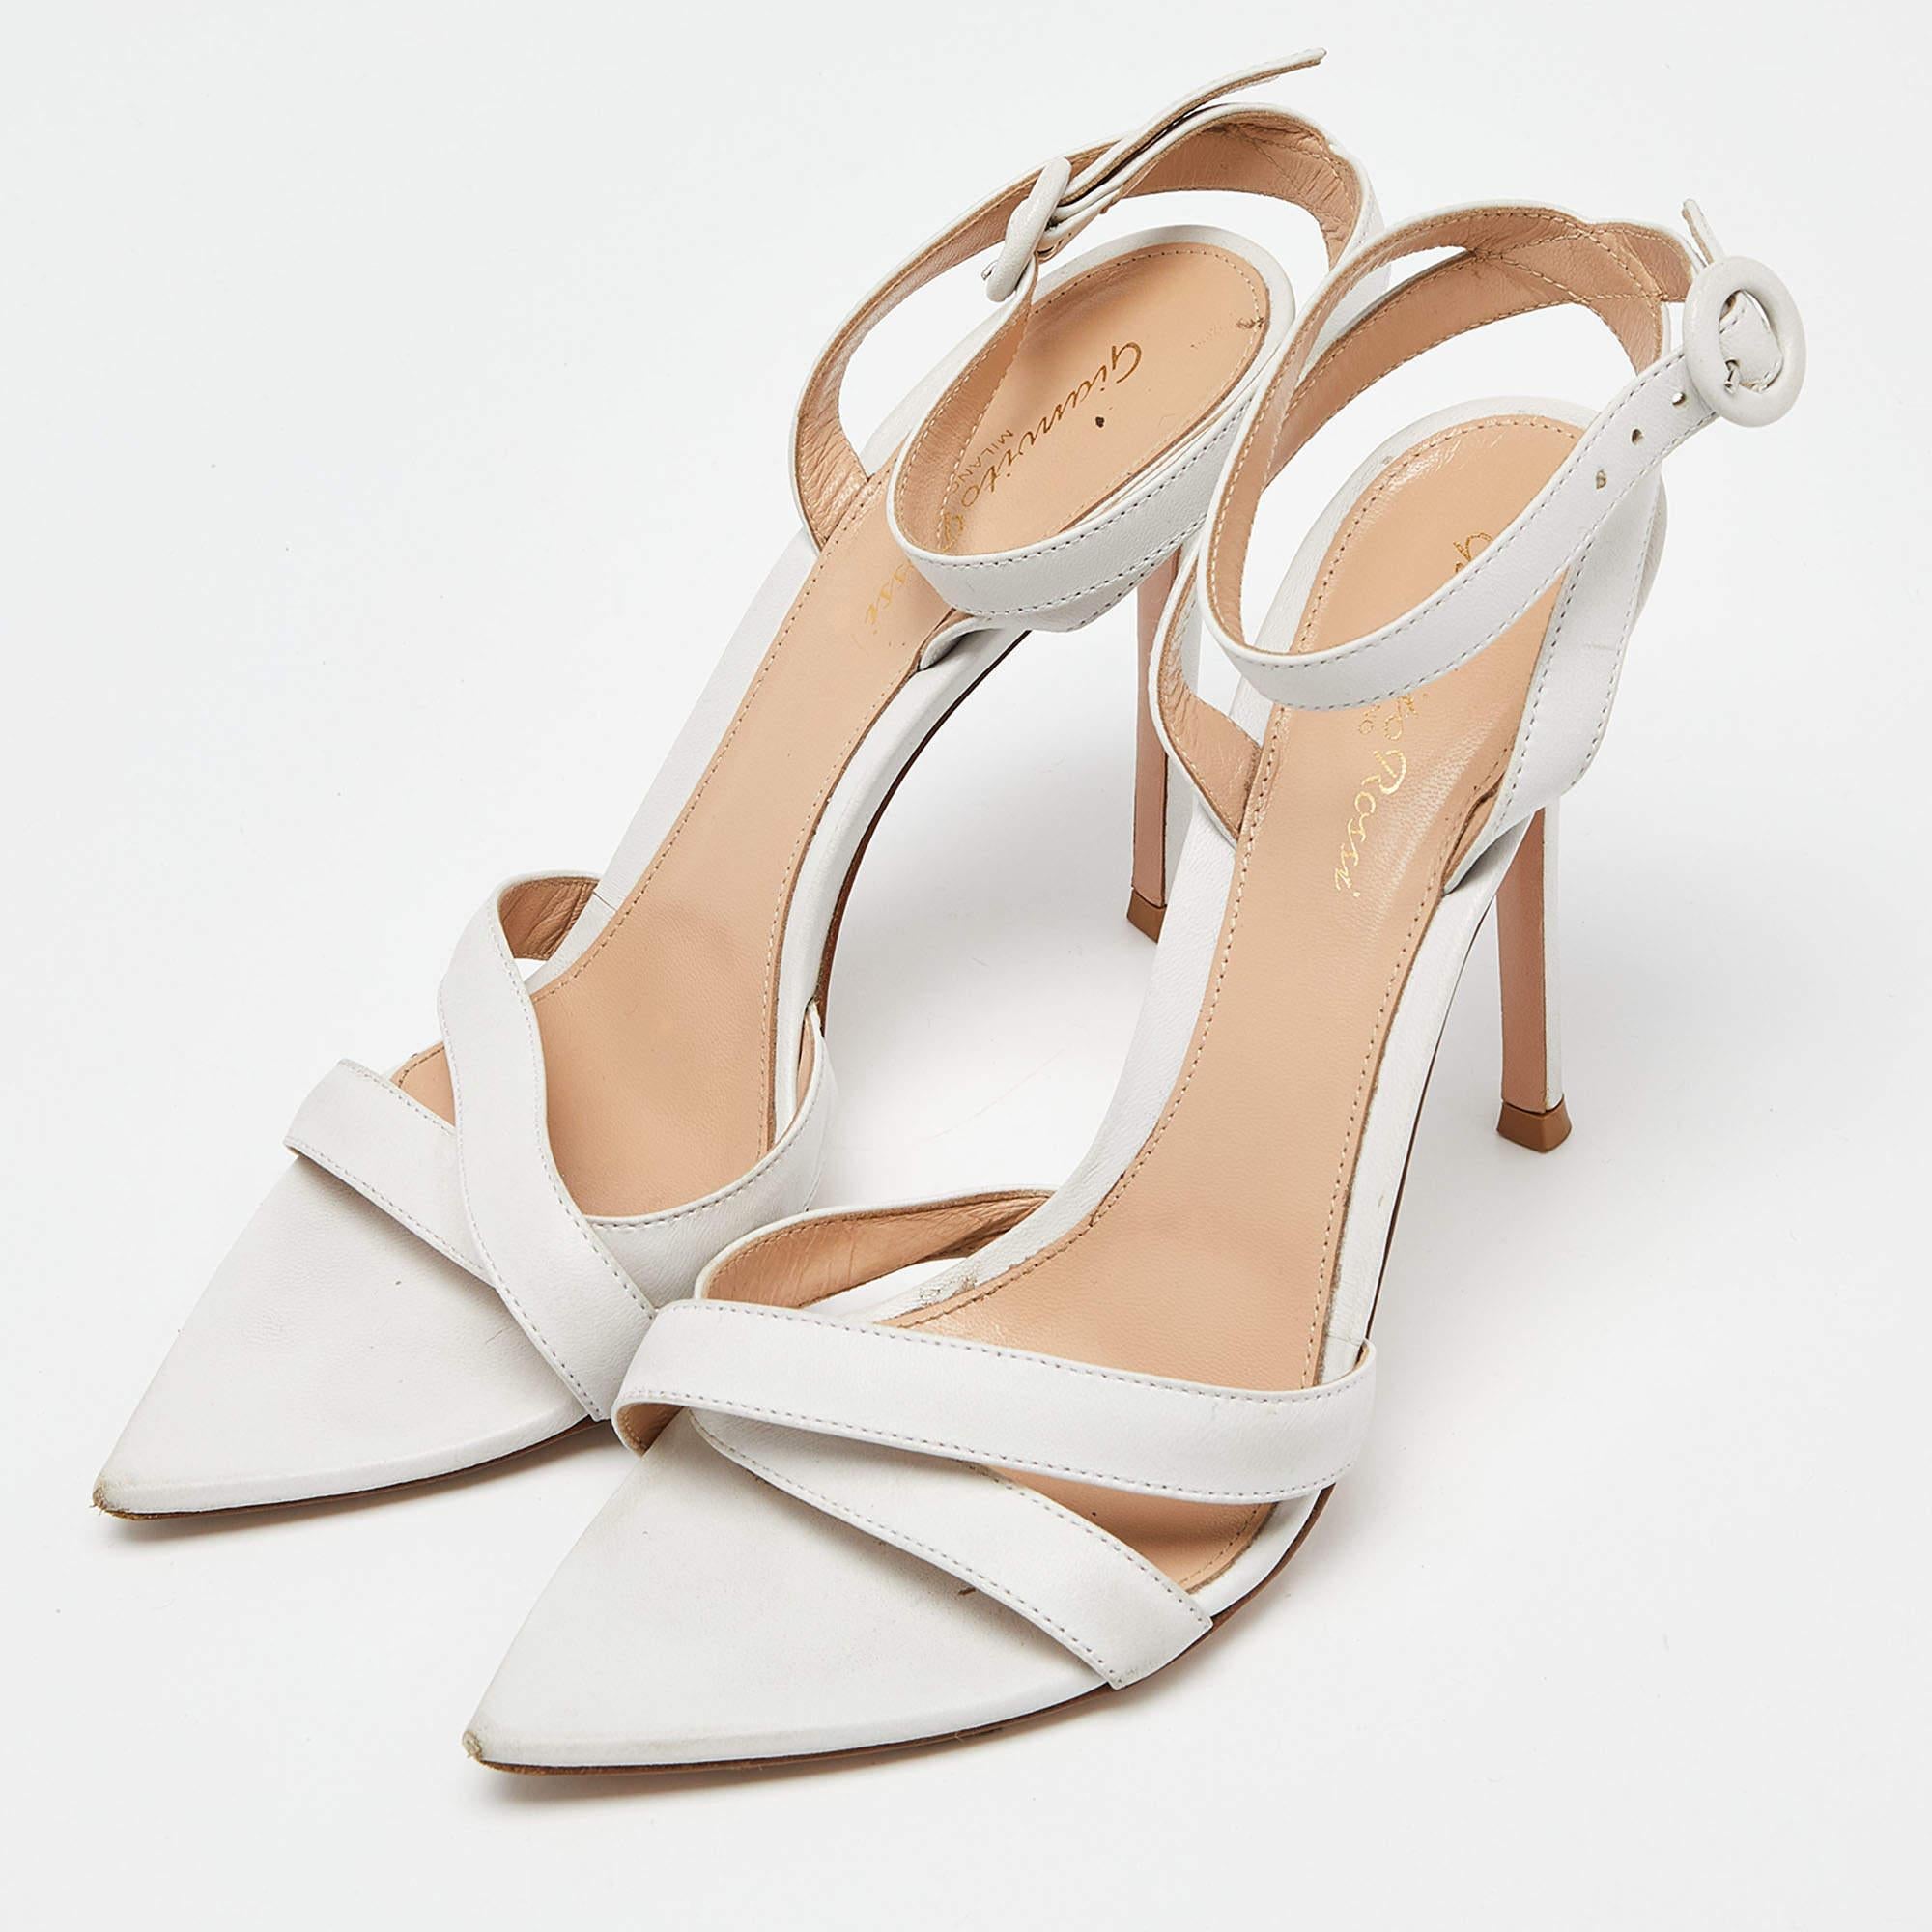 Gianvito Rossi White Leather Ankle Strap Sandals Size 38.5 For Sale 1